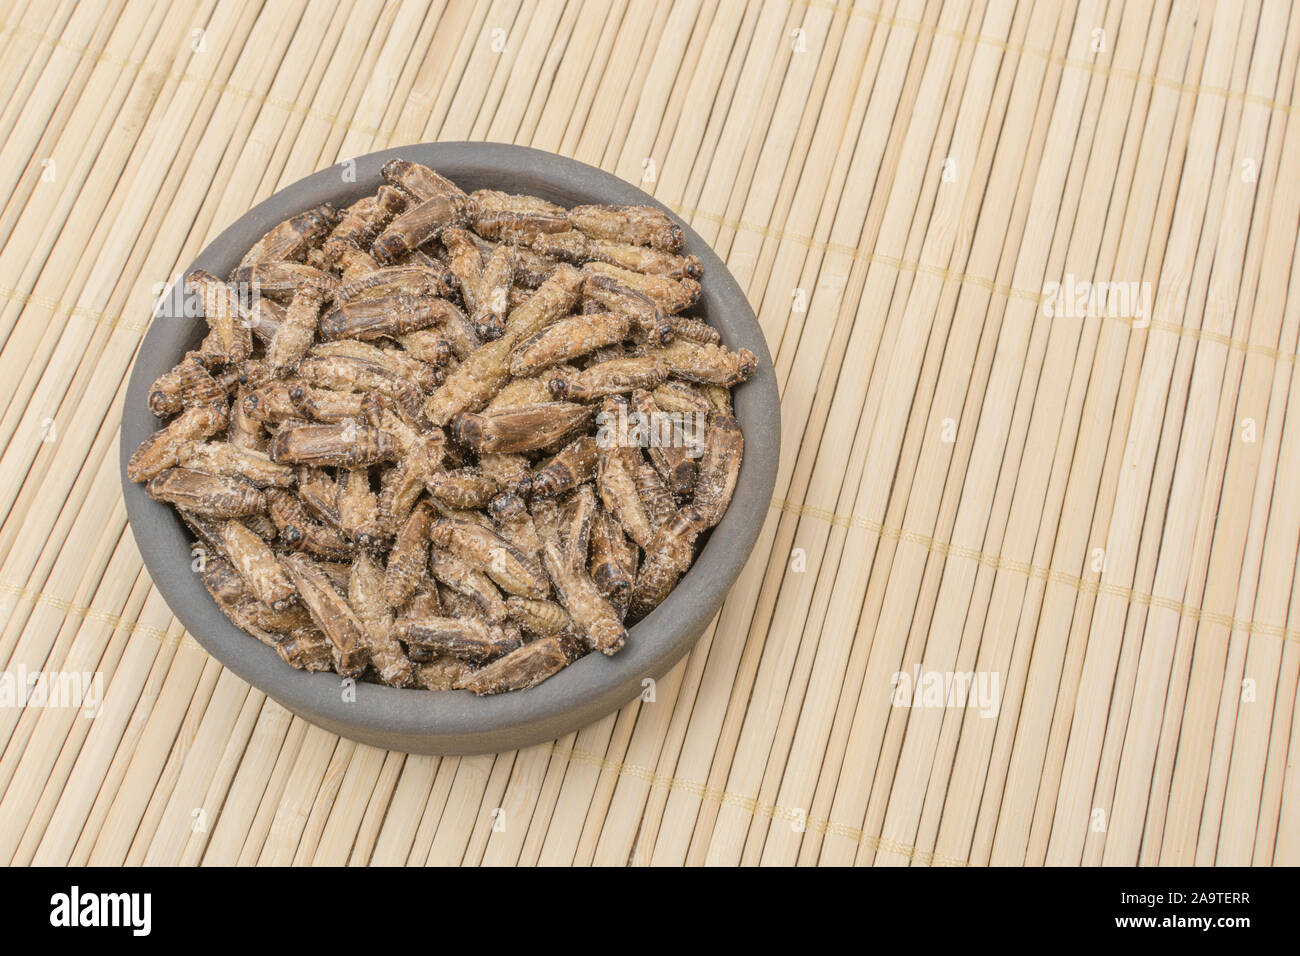 Edible insects - salted Small Crickets possibly Gryllus assimilis - on bamboo mat. Entomophagy, edible bugs, insect superfoods, insects as novel foods Stock Photo